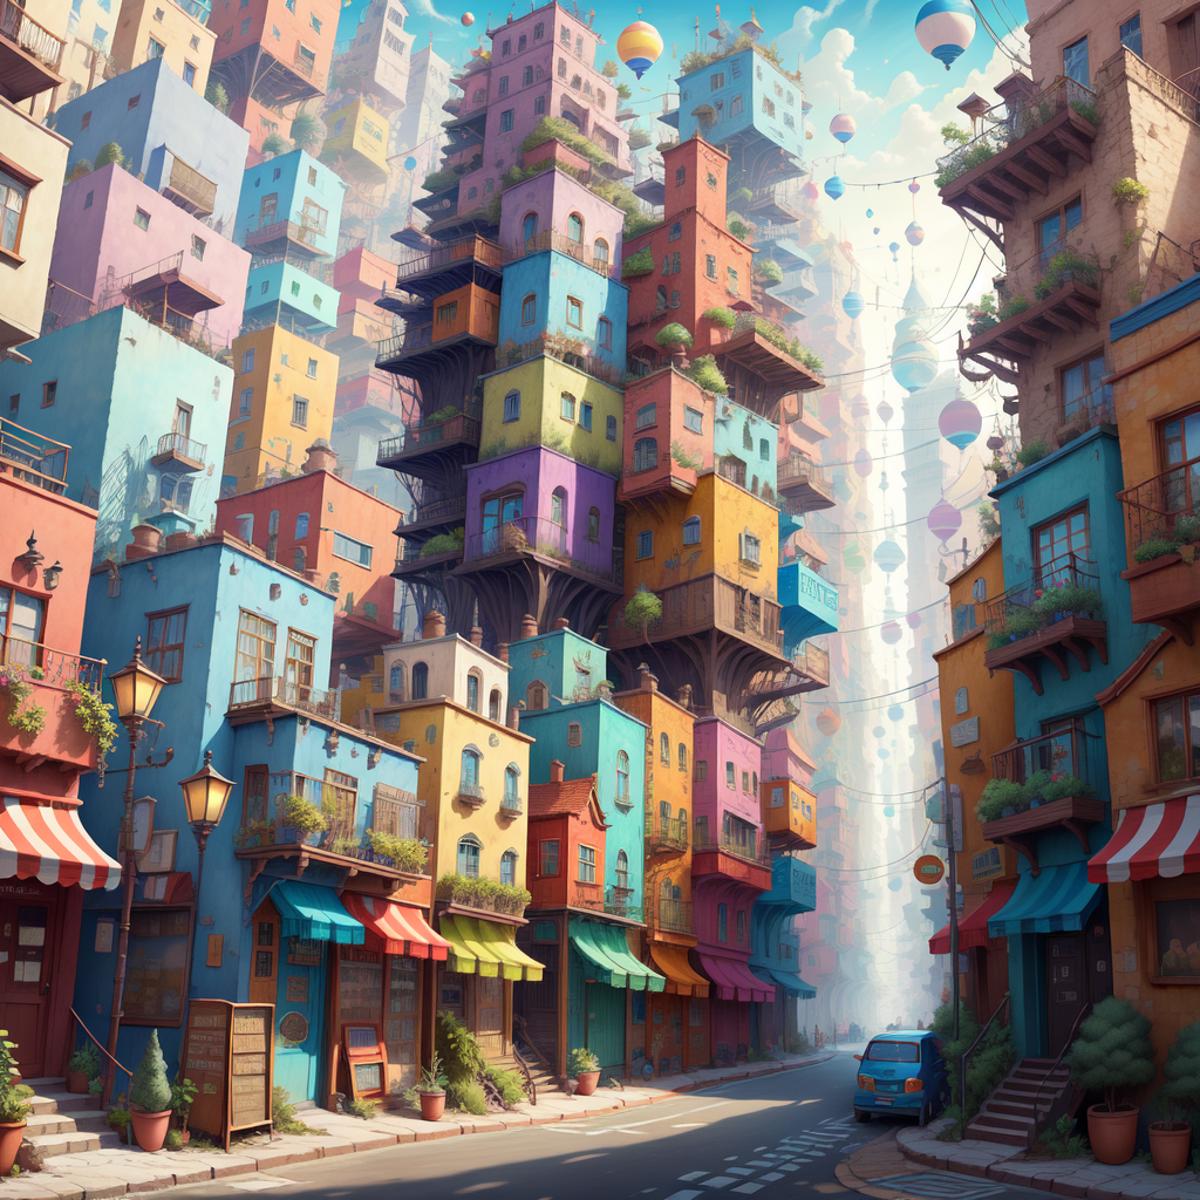 A colorful cartoonish cityscape with buildings and balloons.